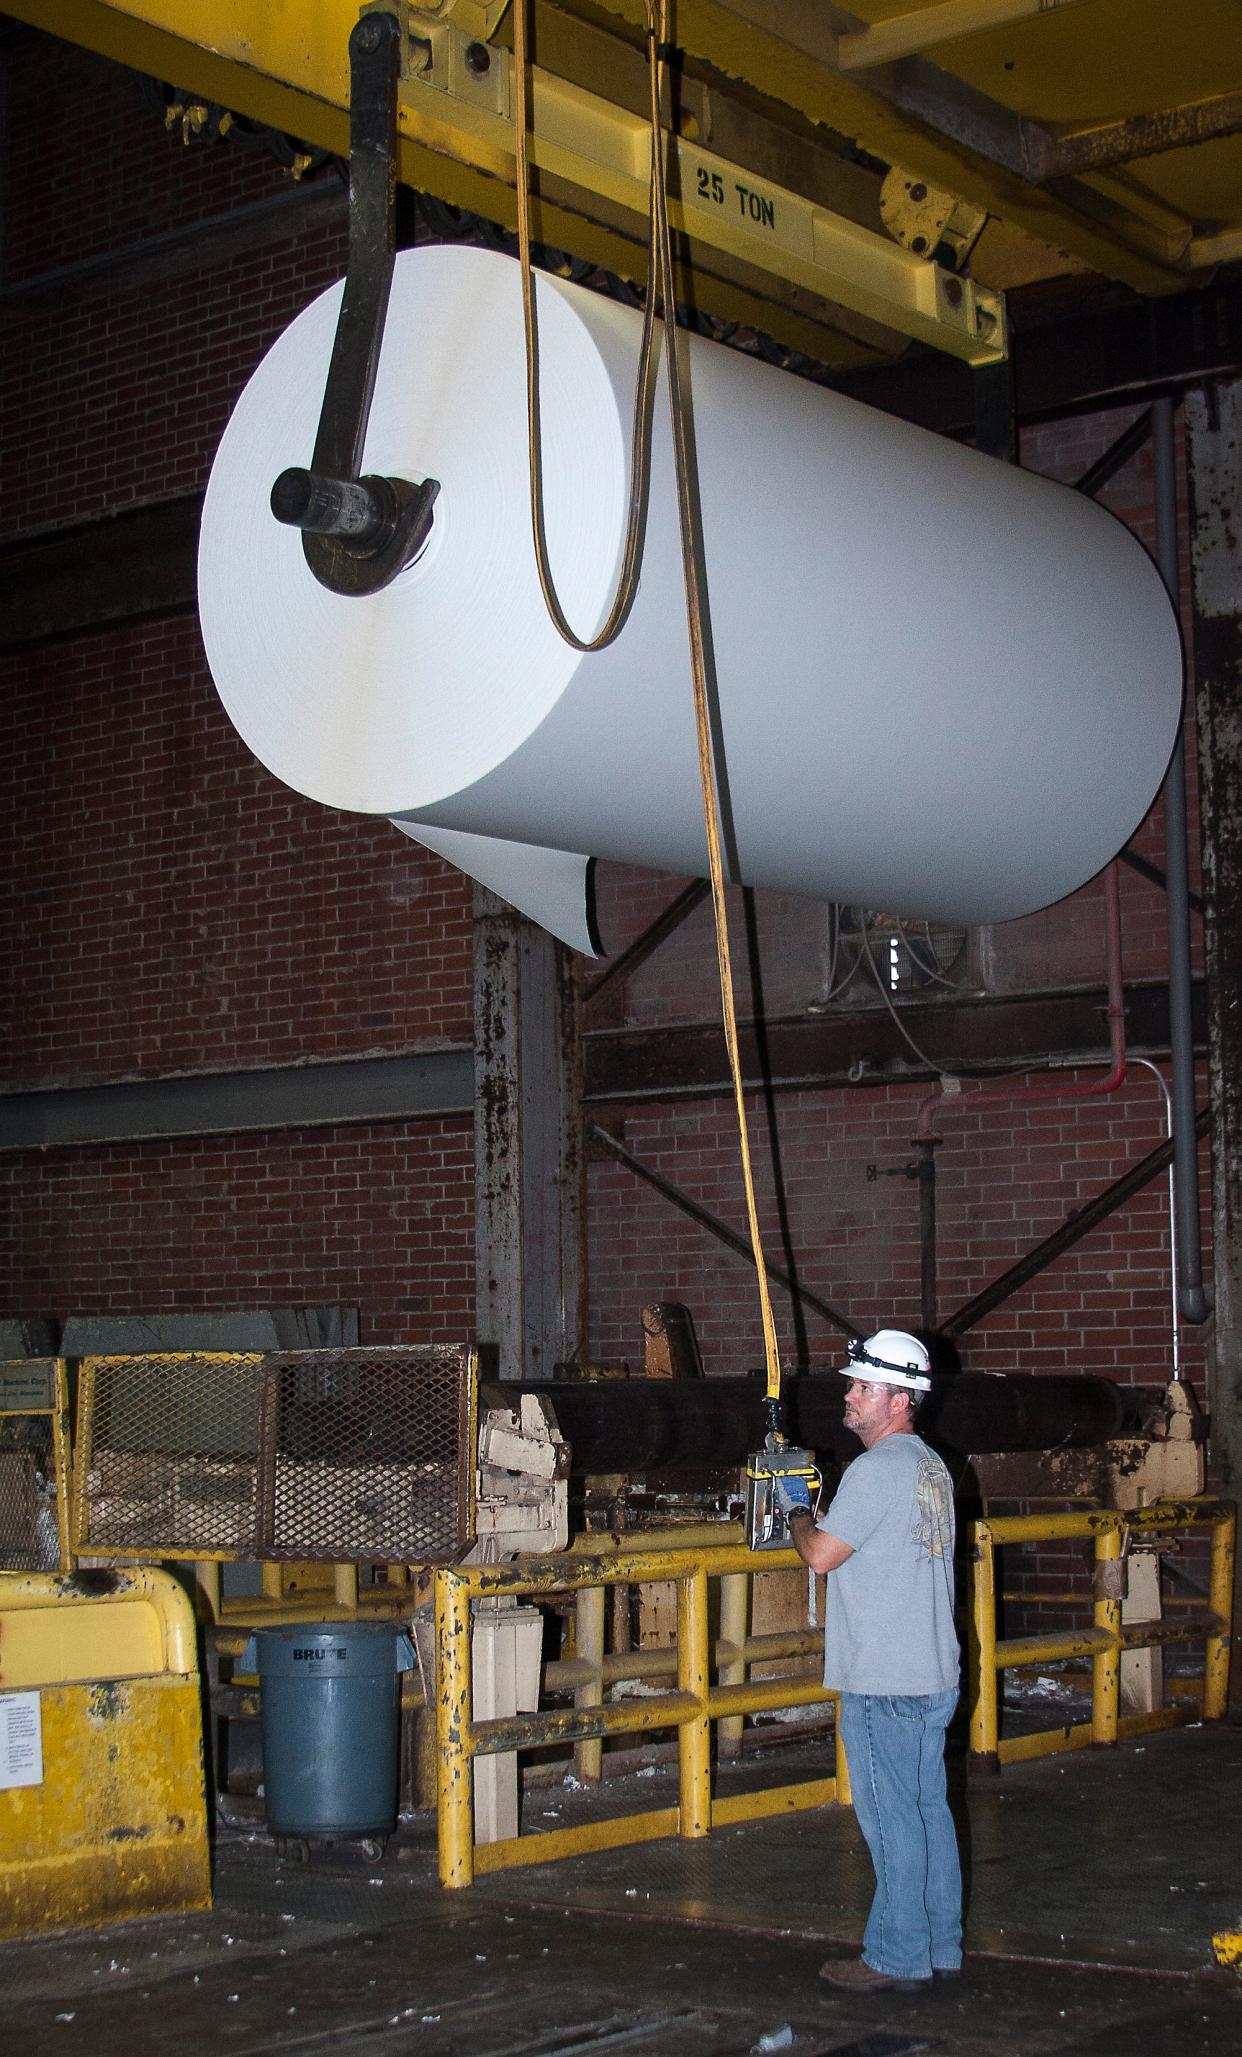 A worker uses a crane to lift a roll of cellulose fiber product at the Foley plant in this 2012. Each roll can weigh up to 15 tons. Buckeye Technologies Inc. initiated a series of projects to reduce its reliance on fossil fuels. The Foley Cellulose mill in Perry, Florida, announced on Sept. 18, 2023, that Georgia-Pacific plans to permanently close the plant.